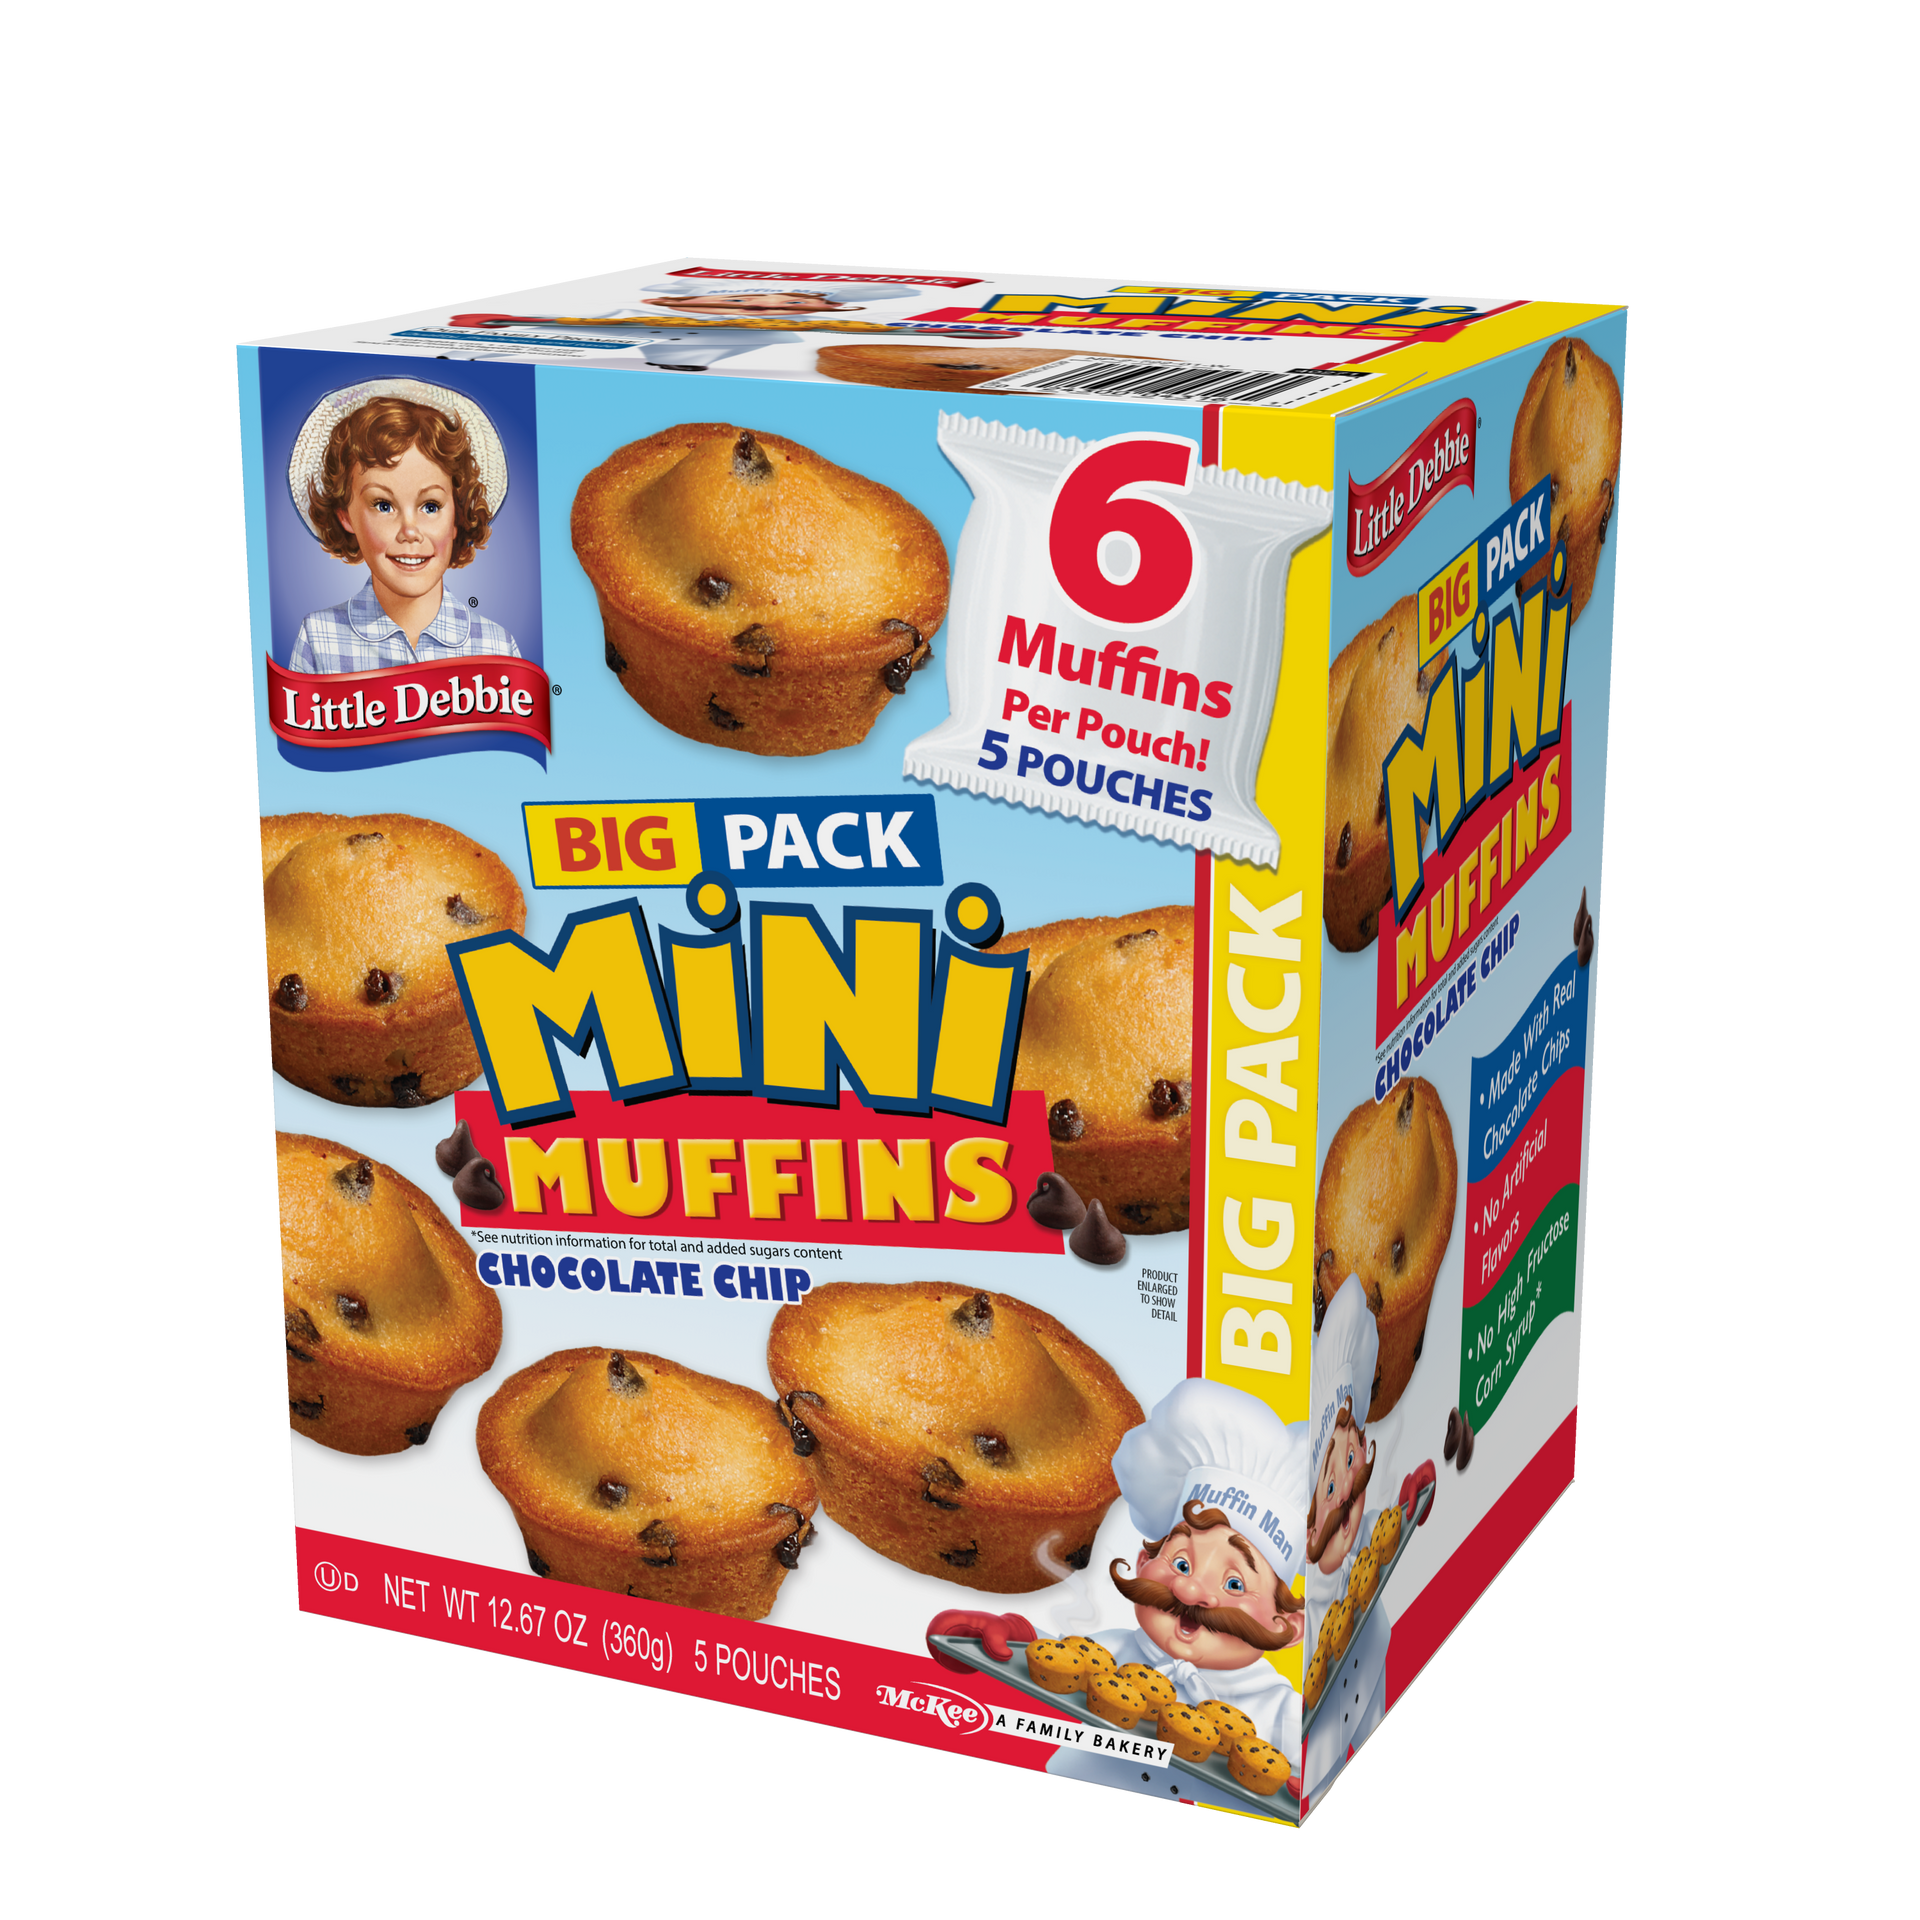 A box of big pack mini muffins with chocolate chips